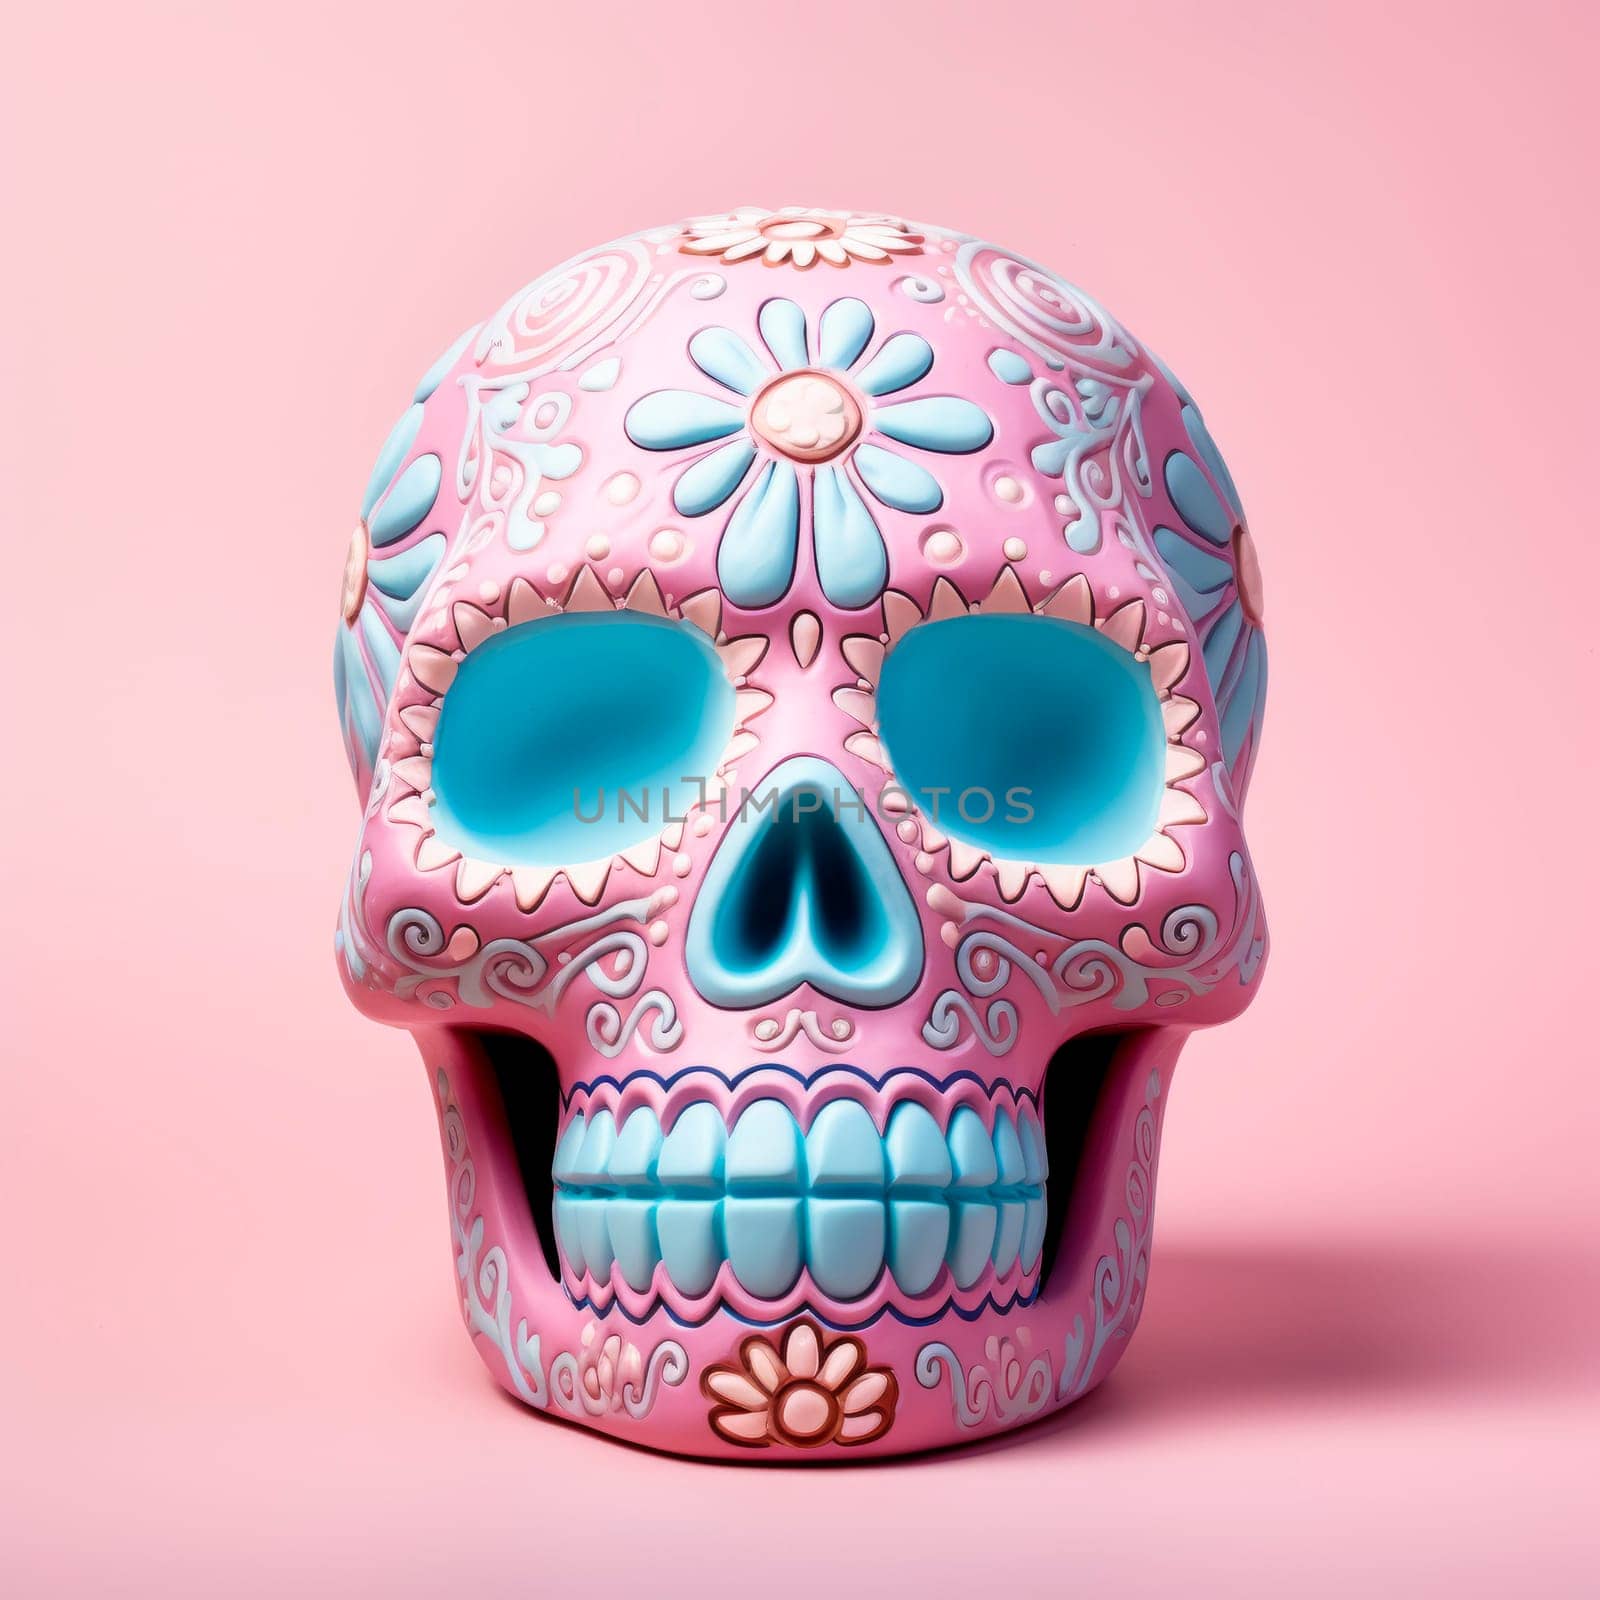 The bright sugarloaf skull is made in Mexican traditions. by Spirina